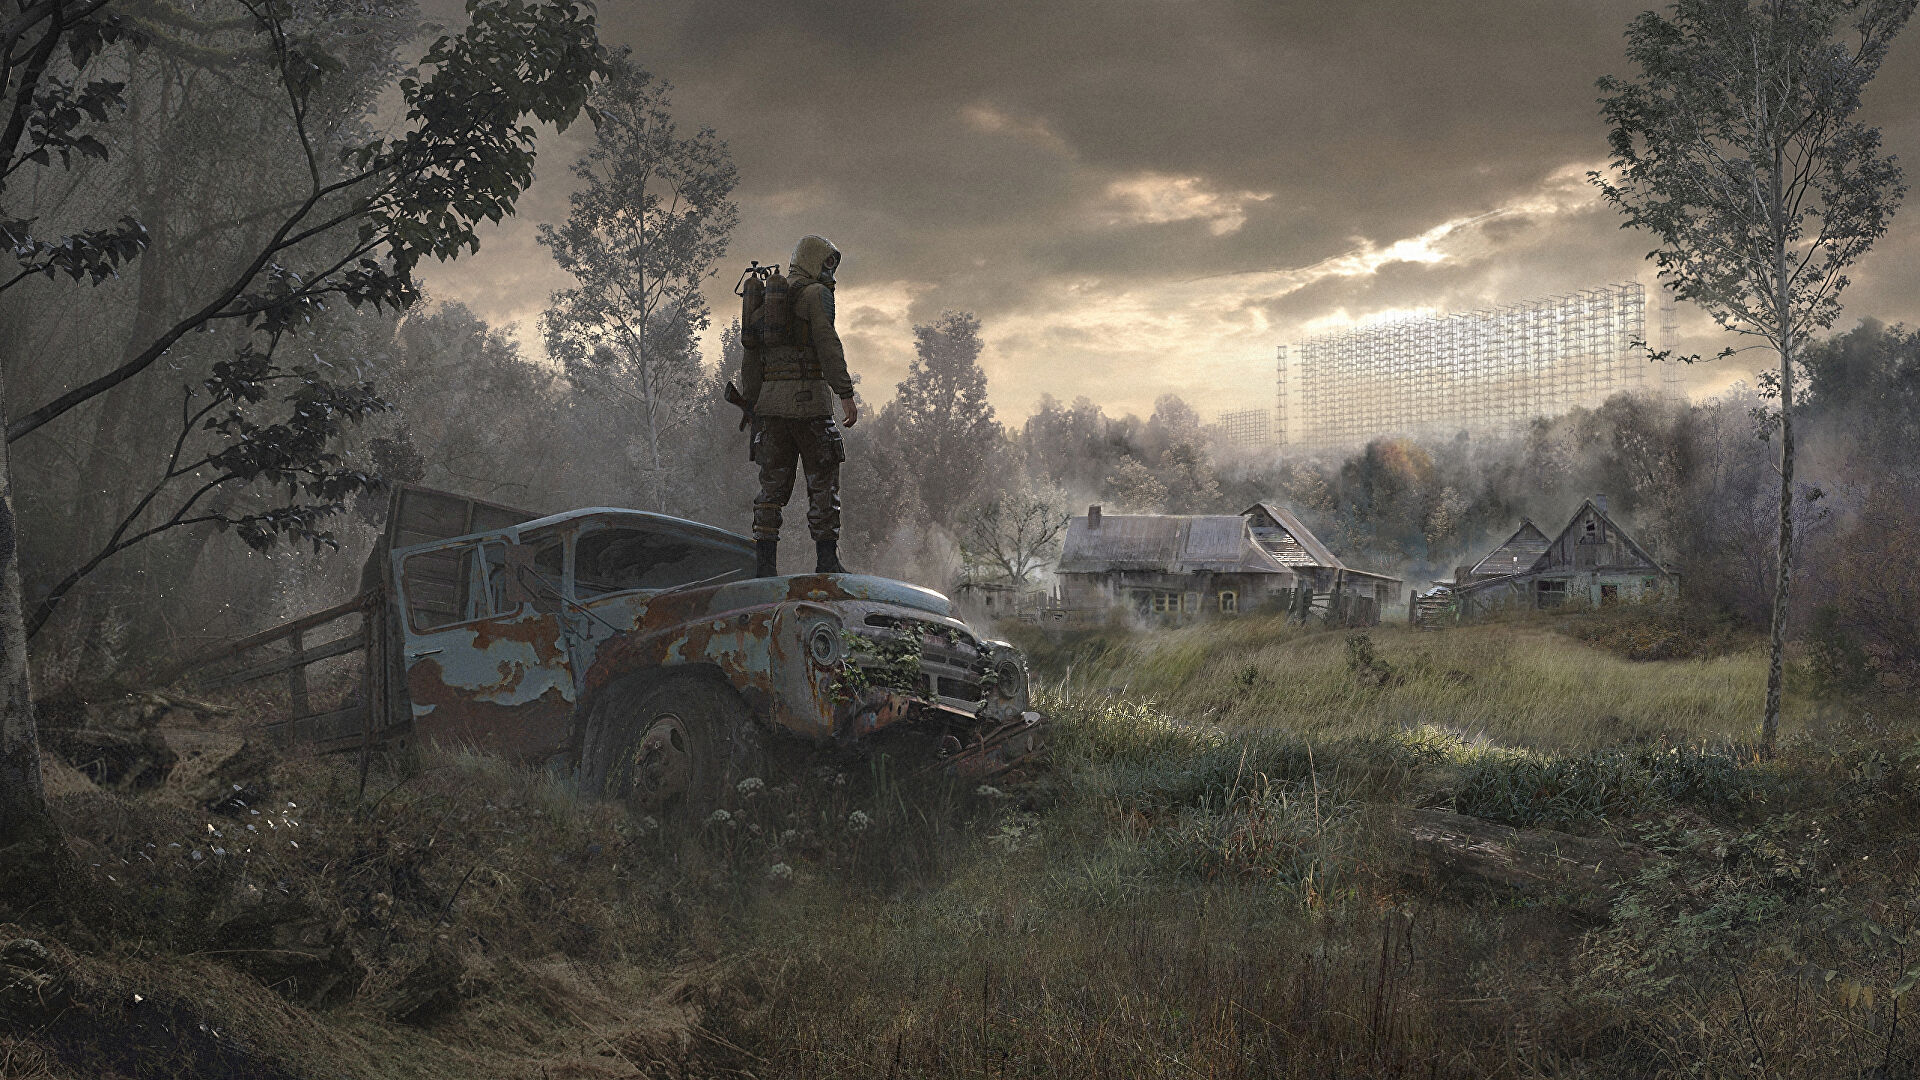 S.T.A.L.K.E.R. 2: Heart of Chornobyl Gets New Trailer, Delayed to 2023 | Gaming Instincts